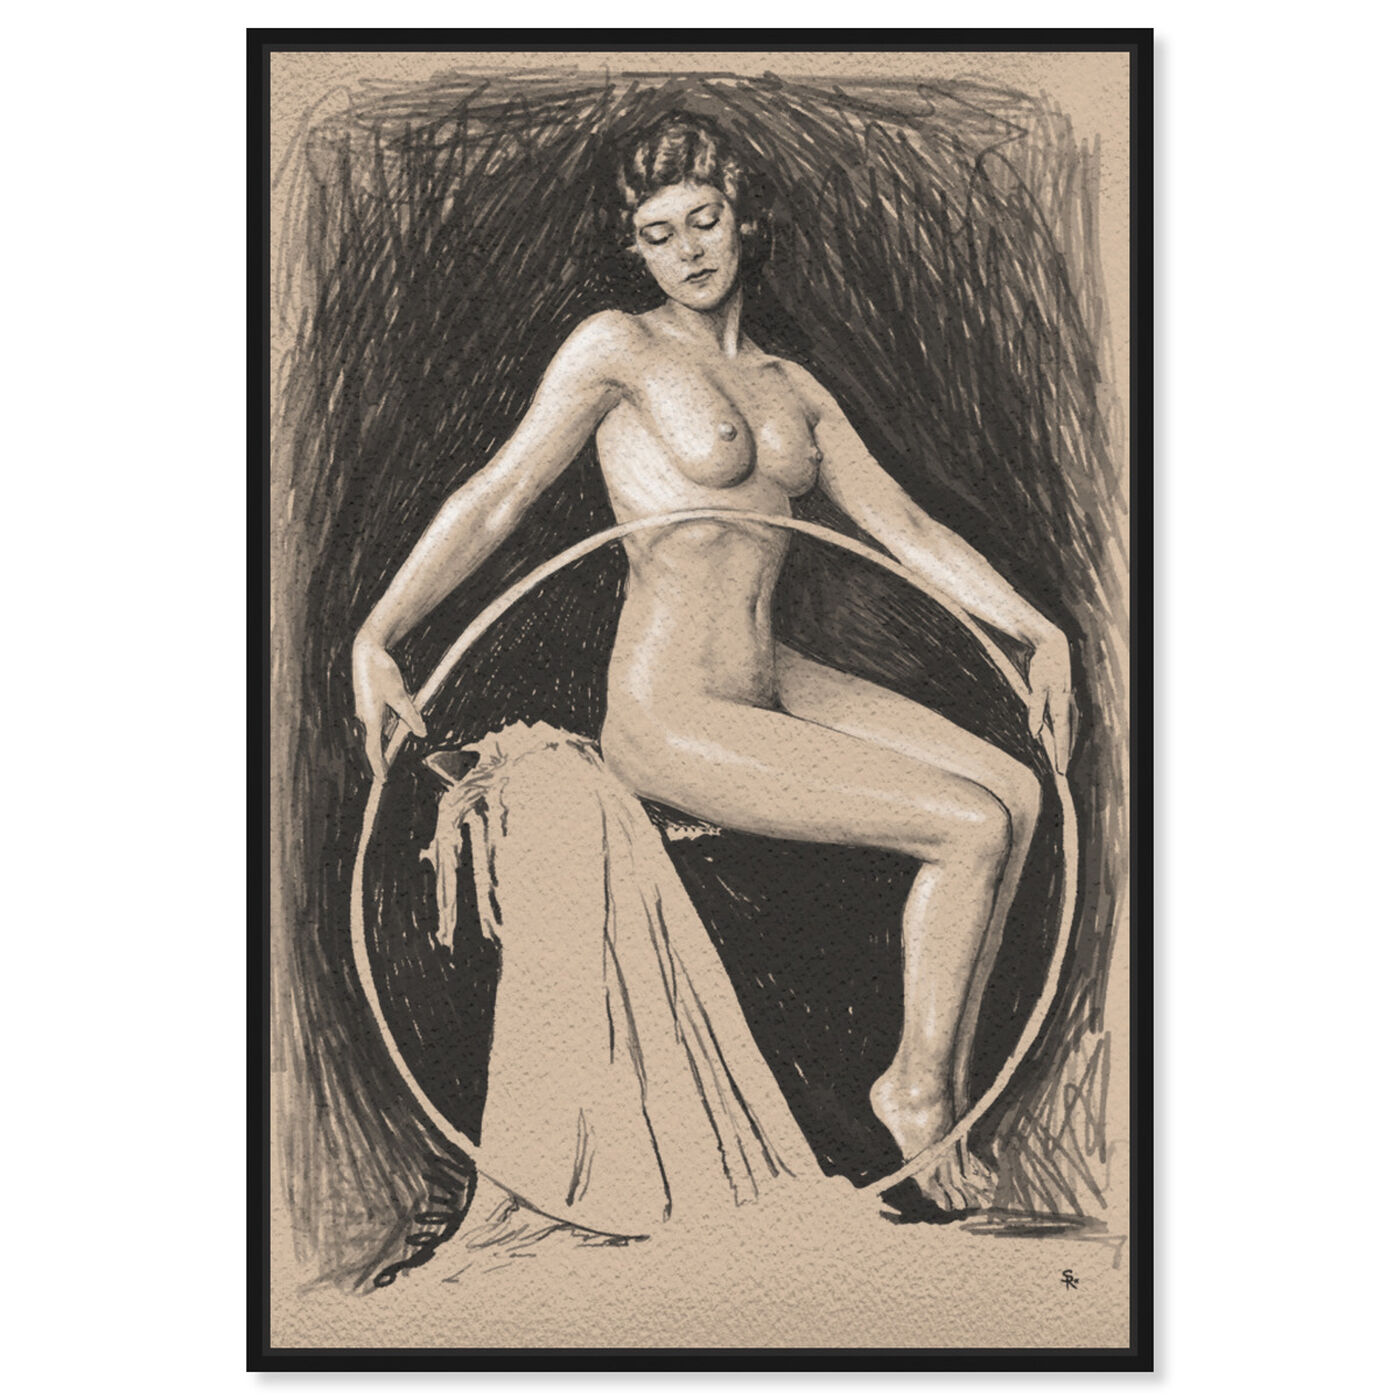 Front view of Nude Woman with Hoop featuring classic and figurative and nudes art.